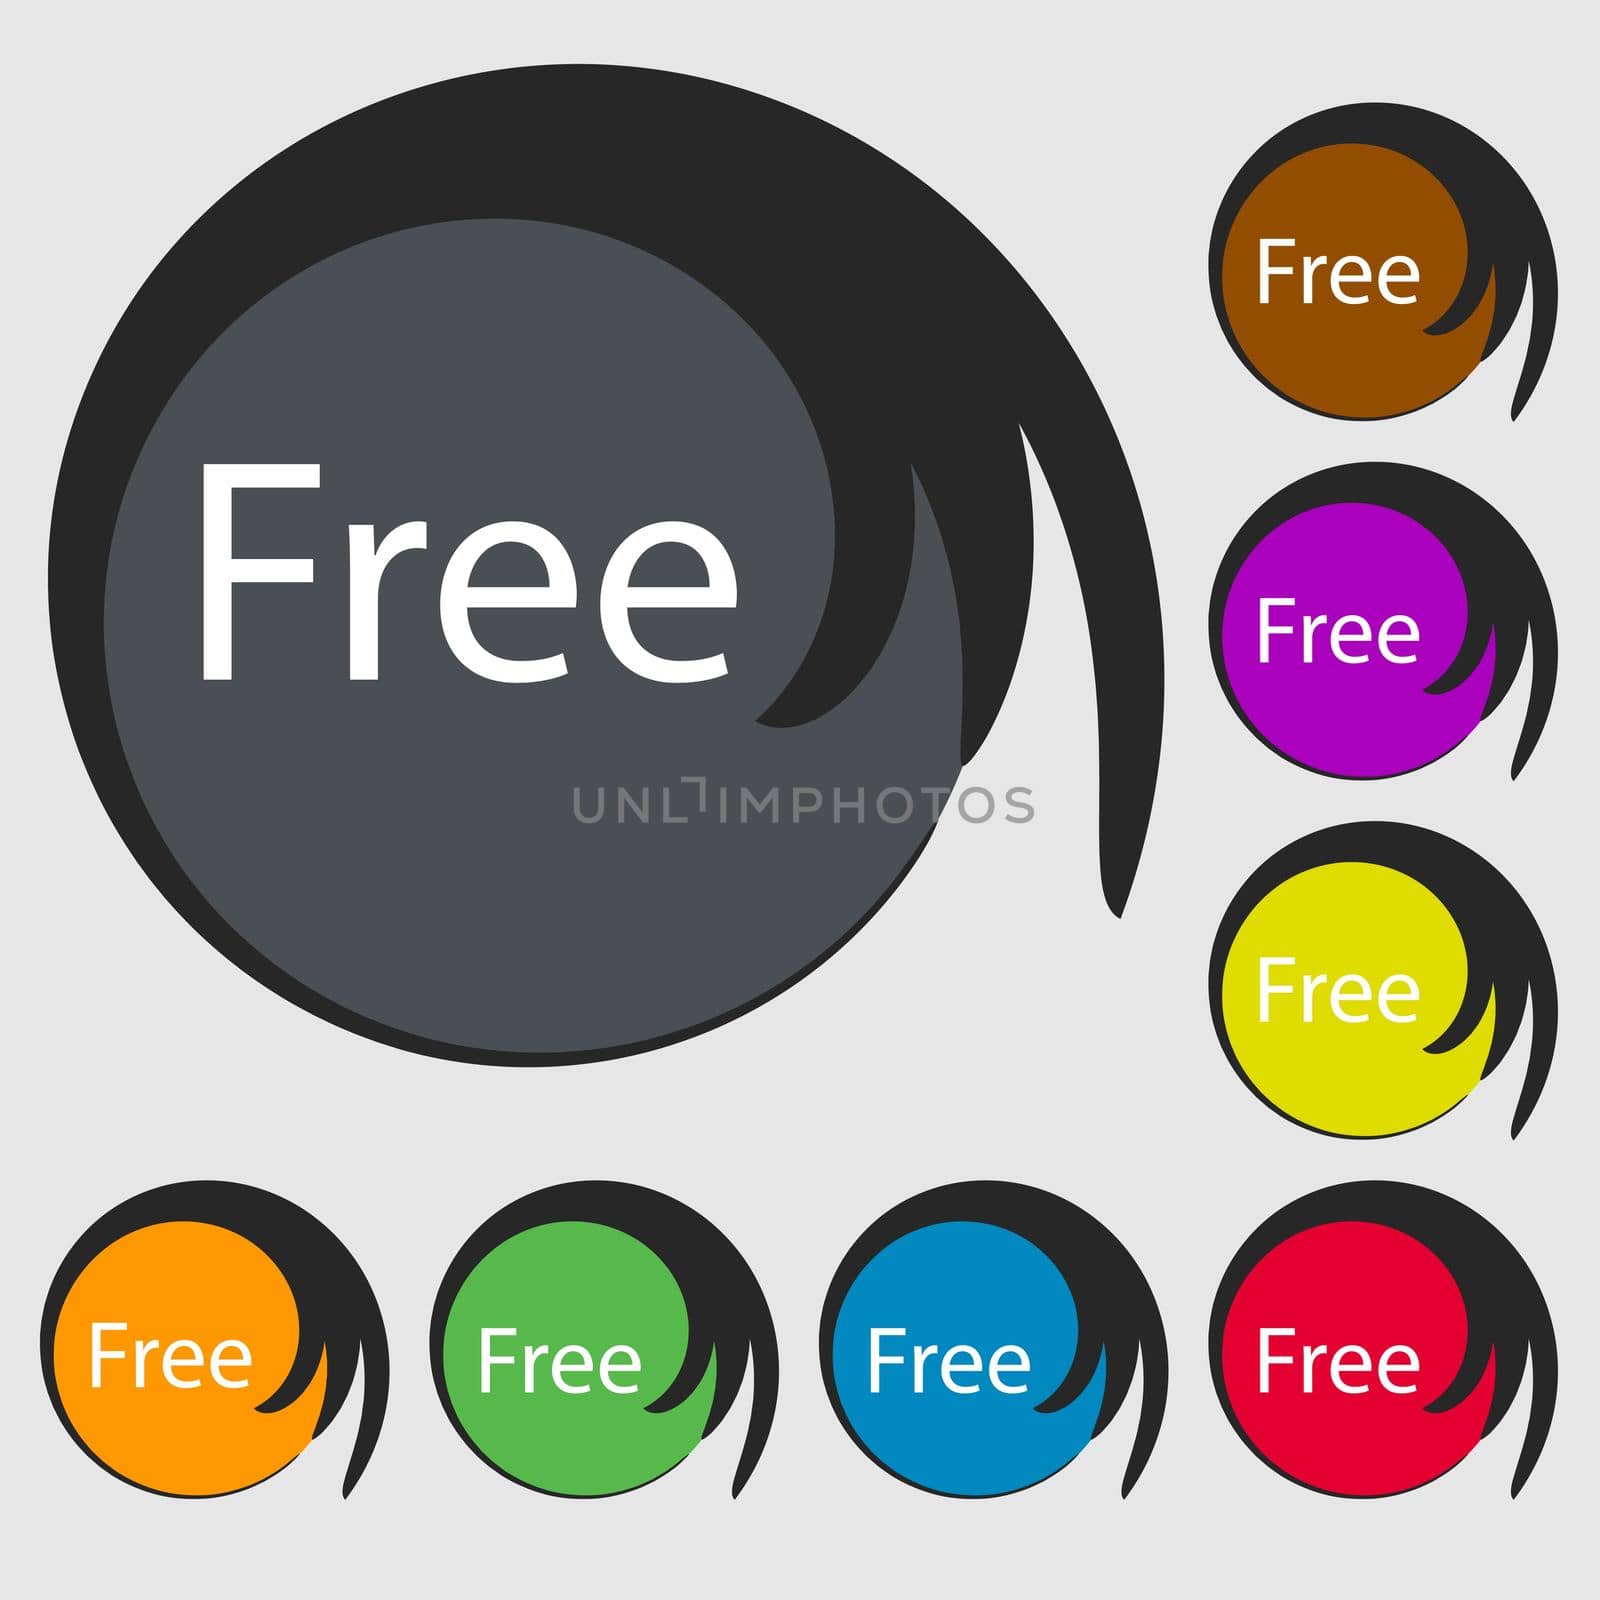 Free sign icon. Special offer symbol. Symbols on eight colored buttons. illustration